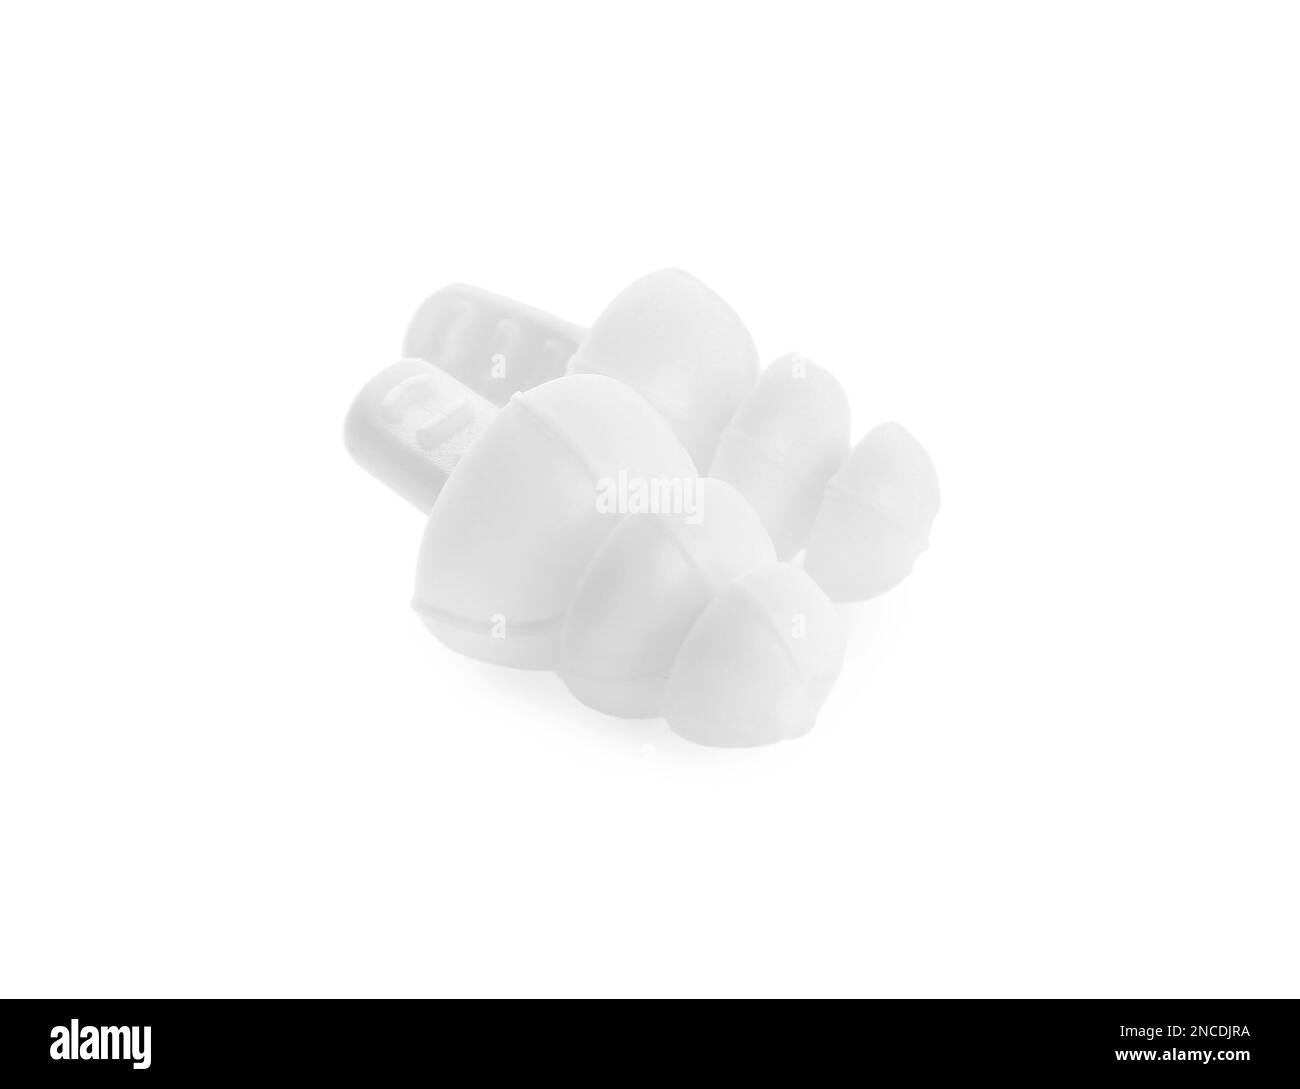 Pair of ear plugs isolated on white Stock Photo